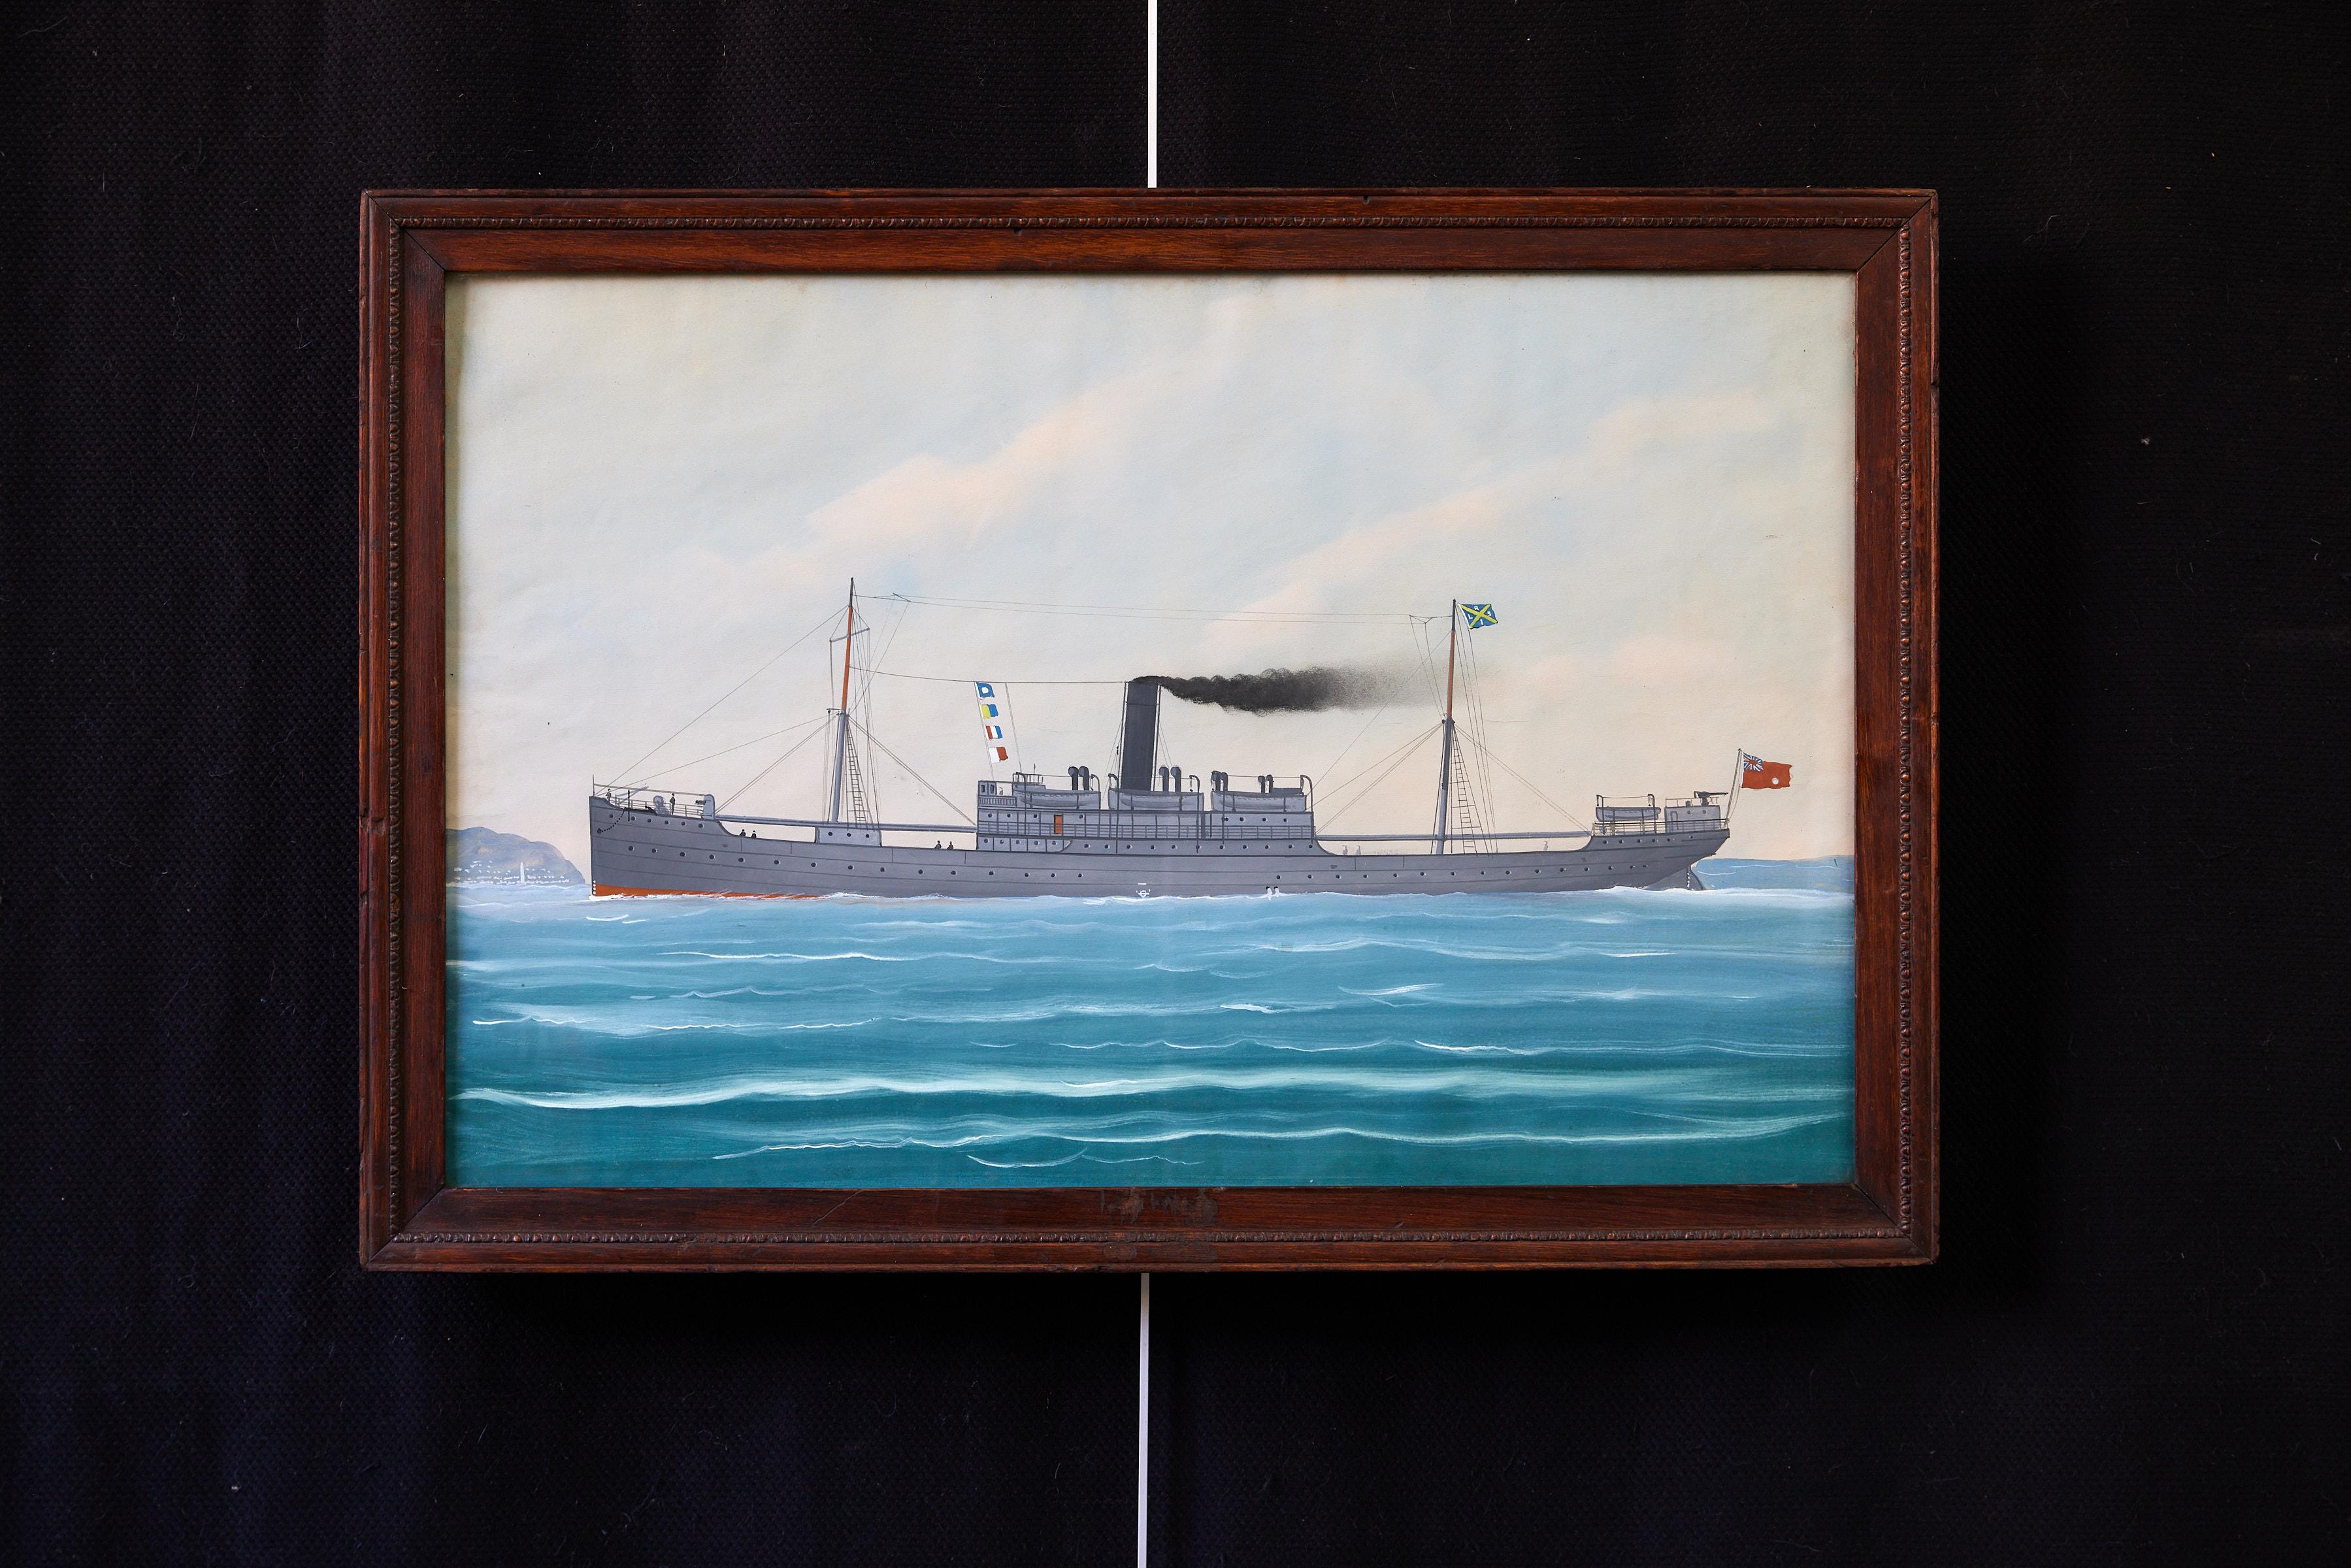 Charming 19th Century nautical painting of a British merchant steamship at sea. In the painting, the Red Ensign flag or 